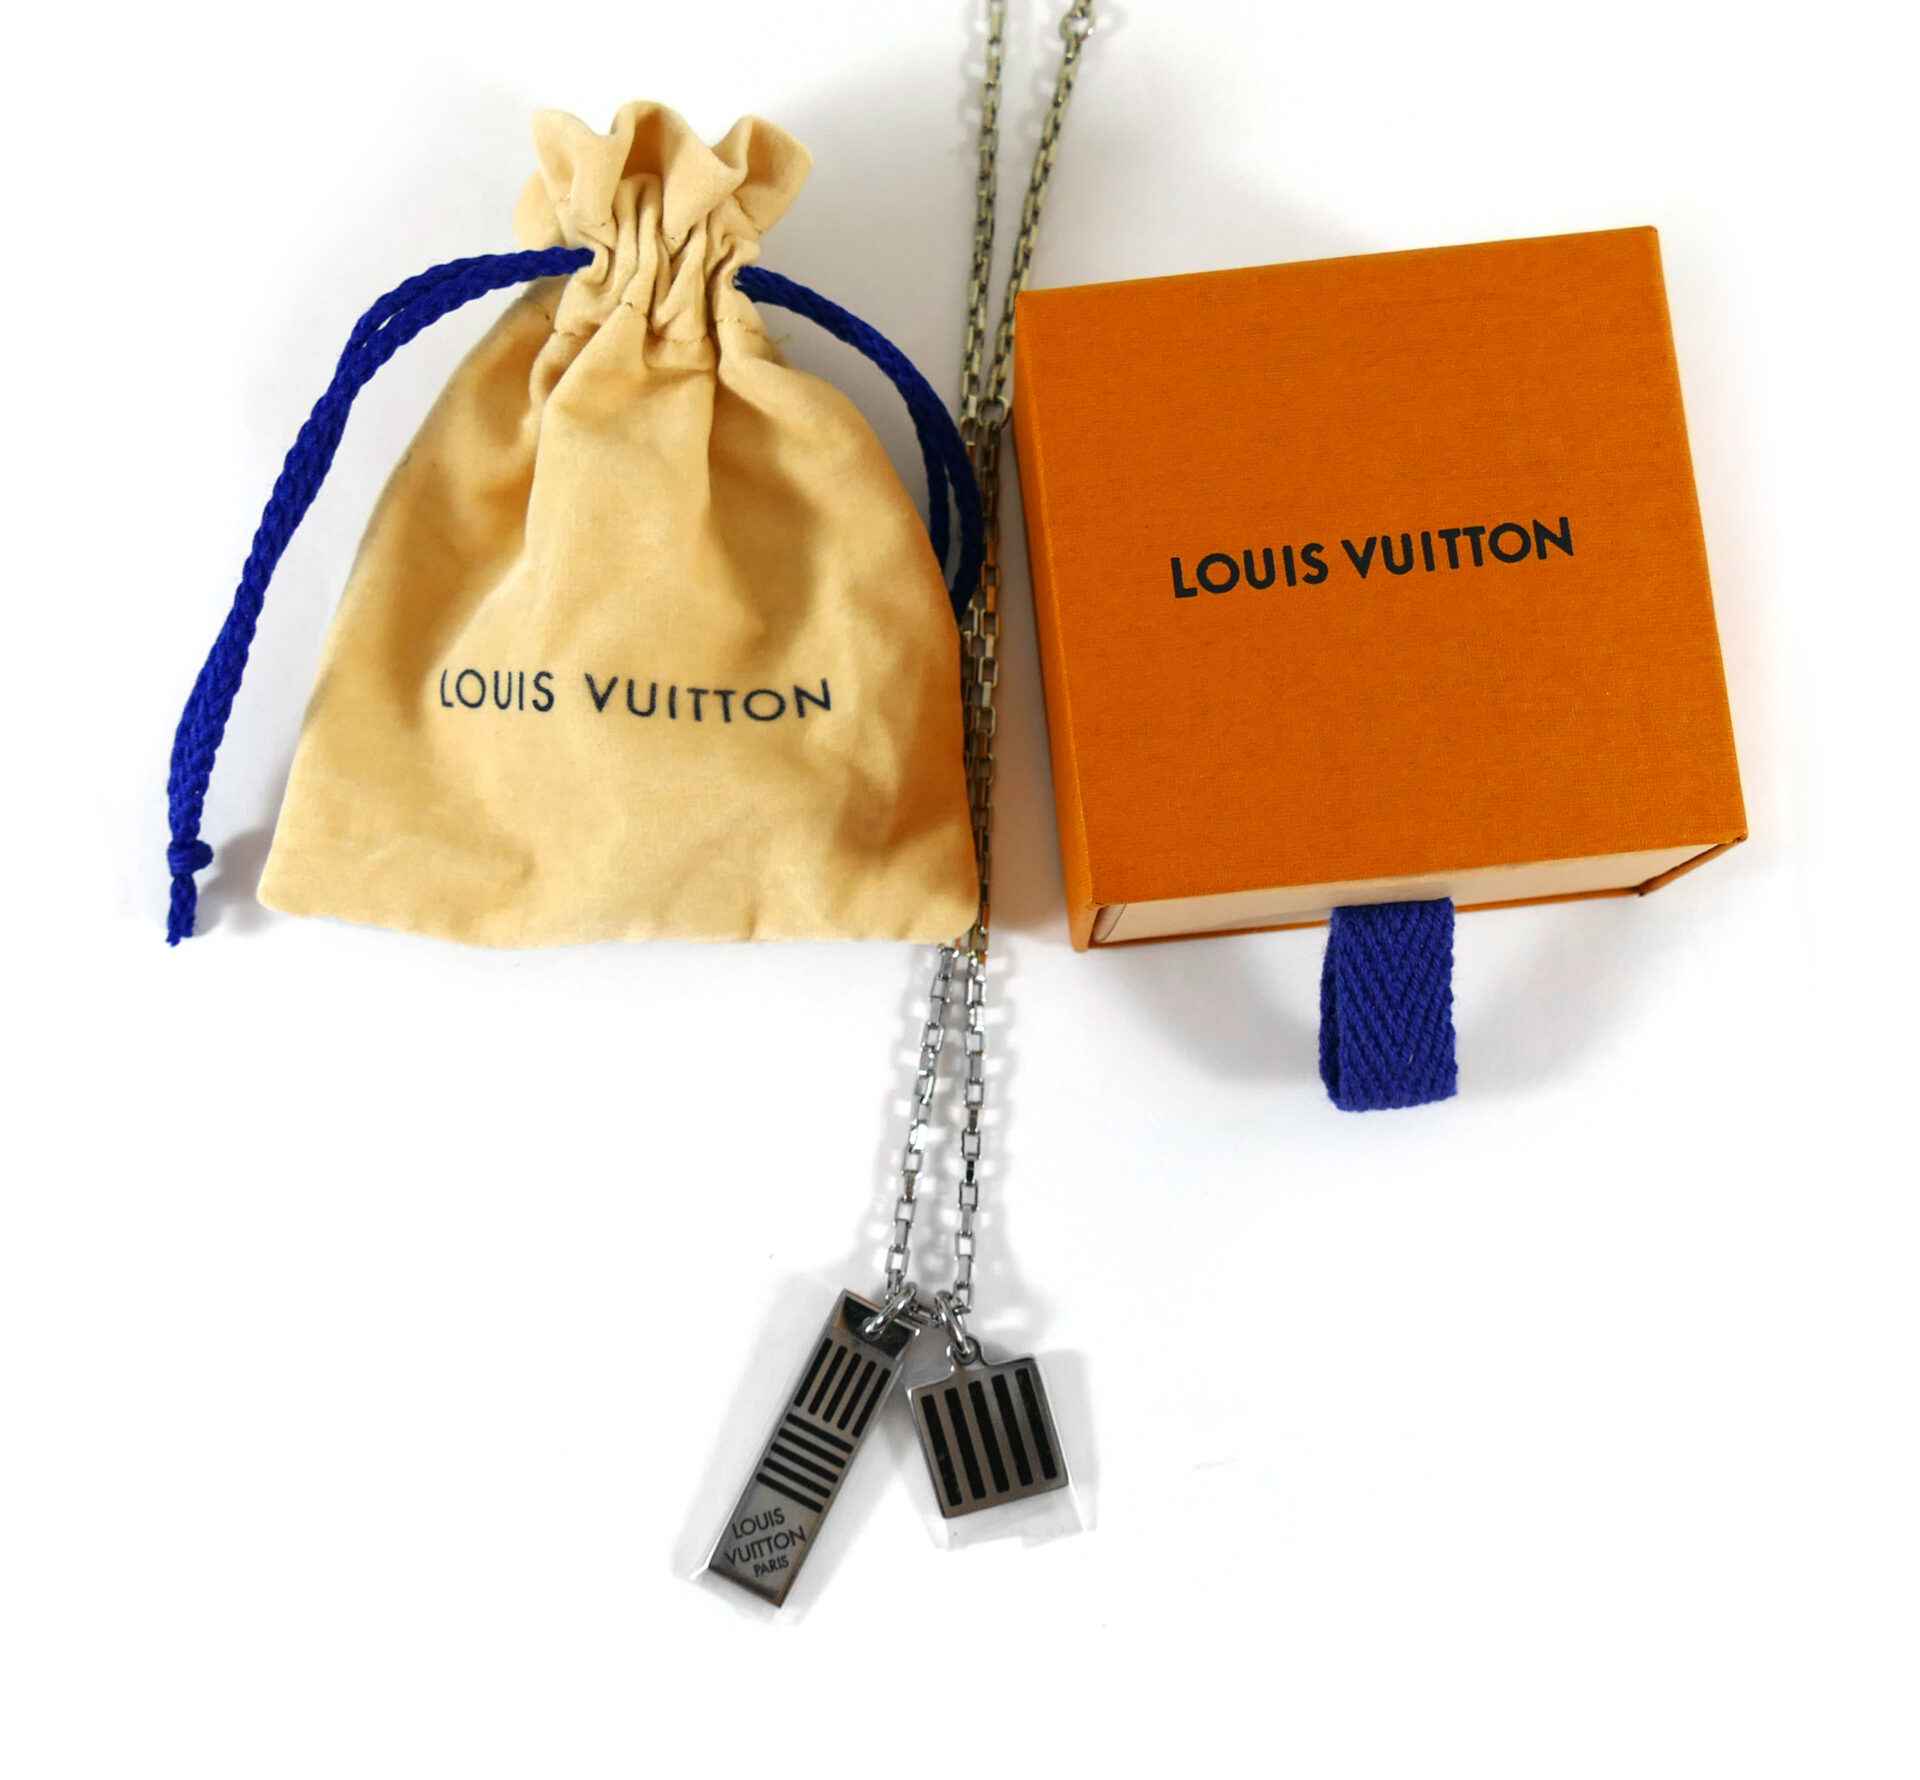 LOUIS VUITTON necklace Damier black Damier Ebene M62490 silver plated used